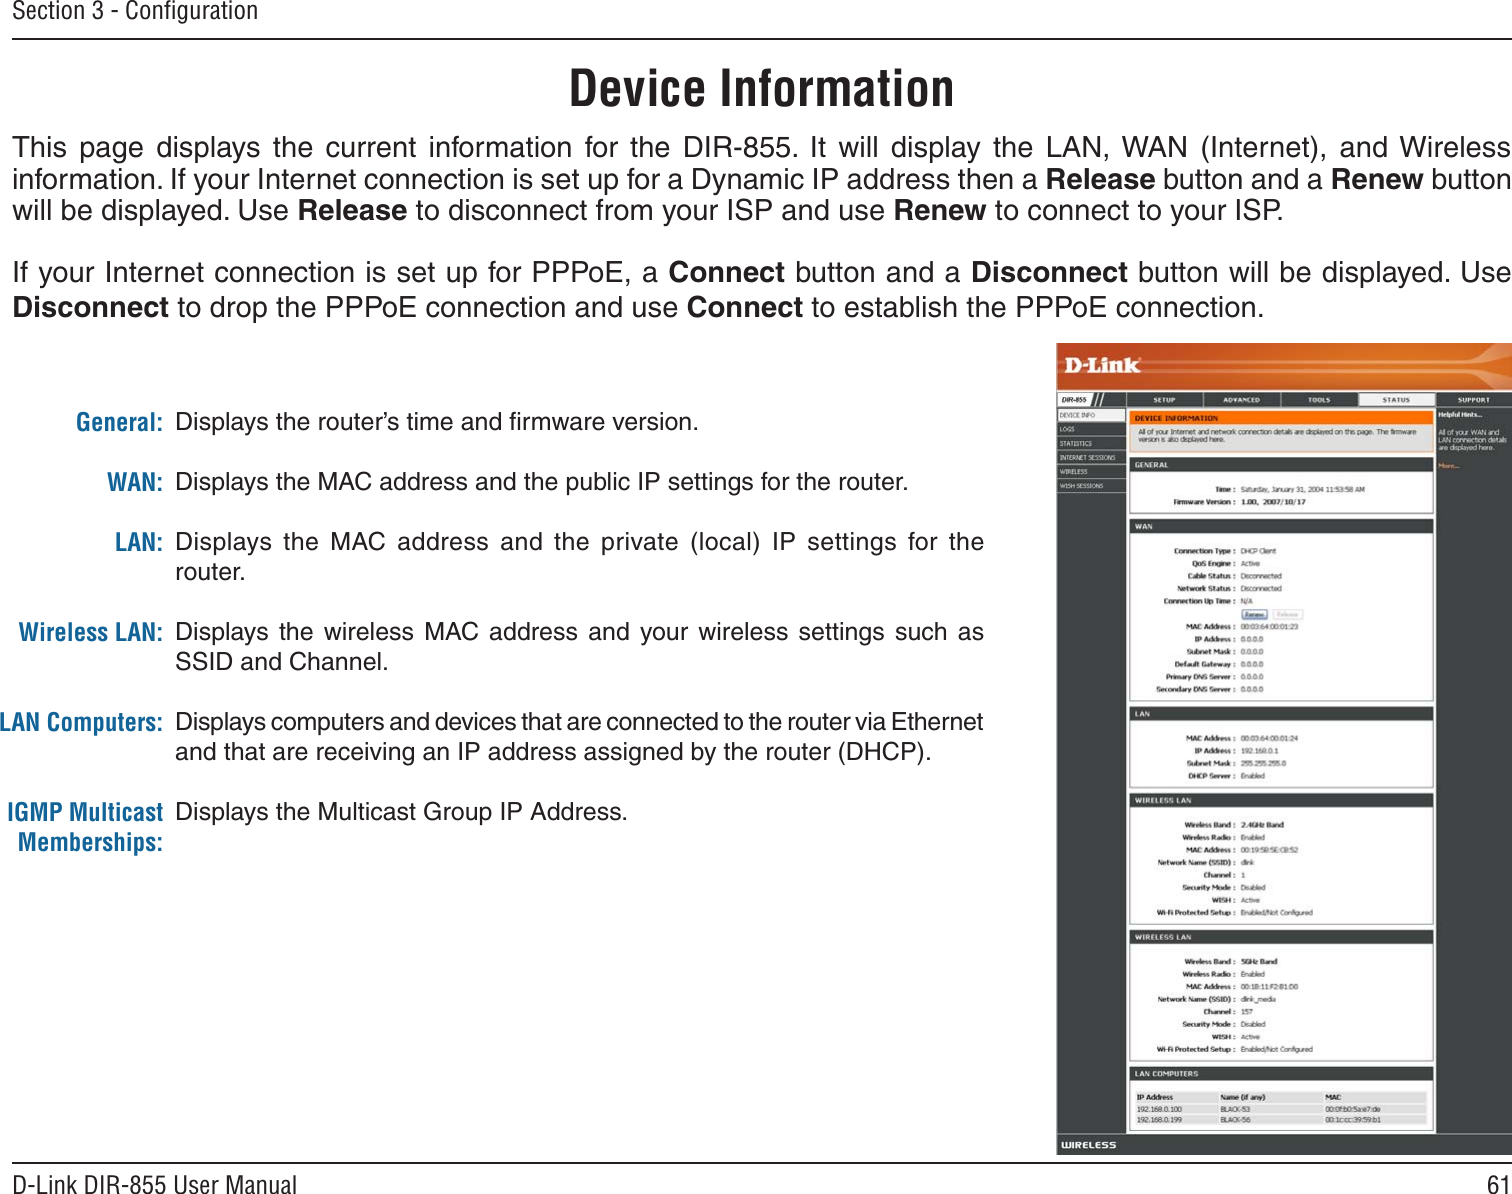 61D-Link DIR-855 User ManualSection 3 - ConﬁgurationThis  page  displays  the  current  information  for  the  DIR-855.  It  will  display  the  LAN, WAN  (Internet),  and Wireless information. If your Internet connection is set up for a Dynamic IP address then a Release button and a Renew button will be displayed. Use Release to disconnect from your ISP and use Renew to connect to your ISP. If your Internet connection is set up for PPPoE, a Connect button and a Disconnect button will be displayed. Use Disconnect to drop the PPPoE connection and use Connect to establish the PPPoE connection.Displays the router’s time and ﬁrmware version.Displays the MAC address and the public IP settings for the router.Displays  the  MAC  address  and  the  private  (local)  IP  settings  for  the router.Displays  the  wireless  MAC  address  and  your wireless  settings  such  as SSID and Channel.Displays computers and devices that are connected to the router via Ethernet and that are receiving an IP address assigned by the router (DHCP). Displays the Multicast Group IP Address.General:WAN:LAN:Wireless LAN:LAN Computers:IGMP Multicast Memberships:Device Information